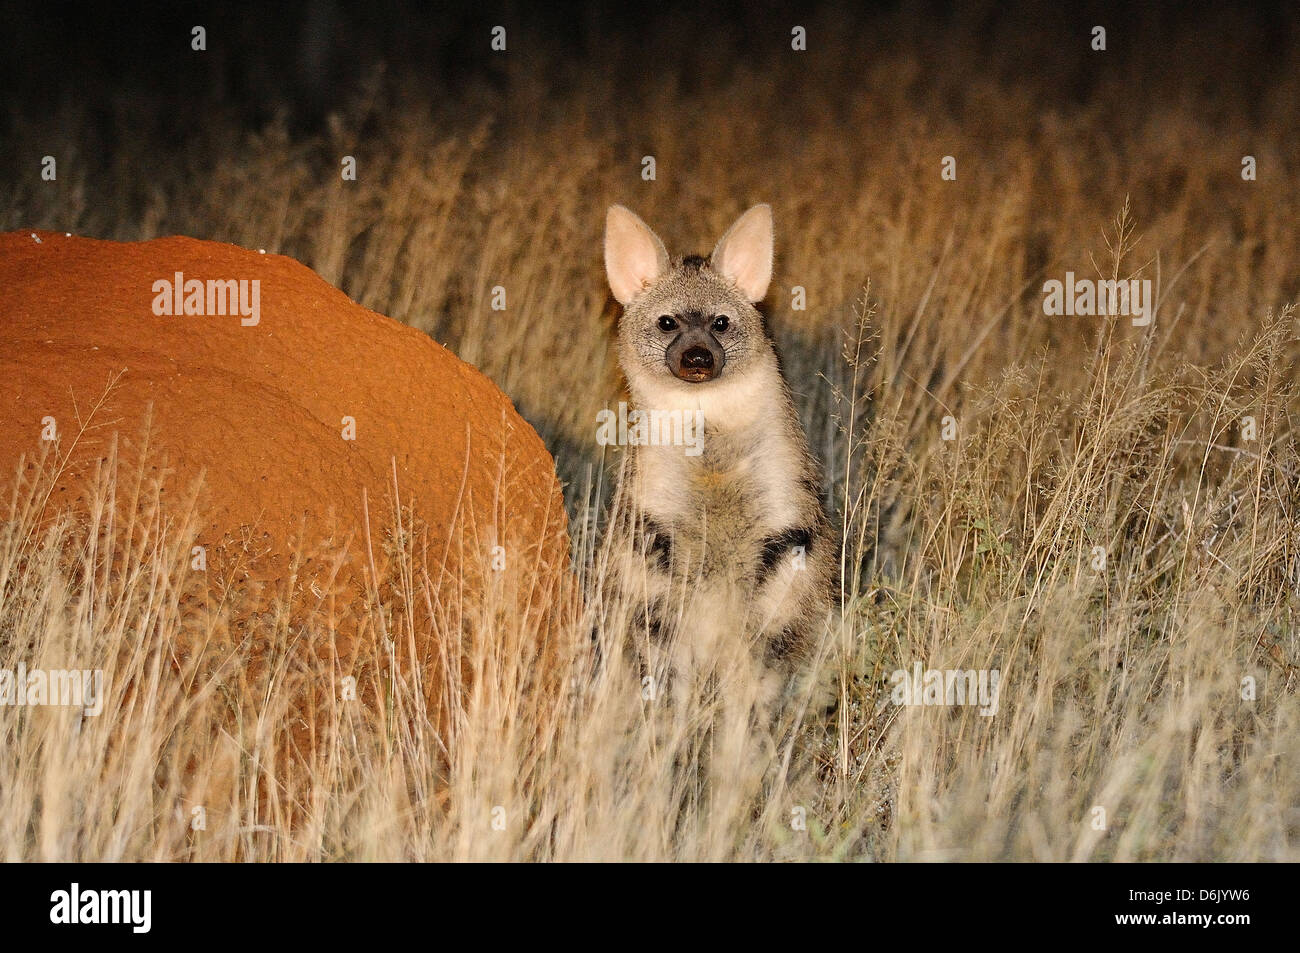 Aardwolf Proteles cristata Photographed in the wild against termite mound in Northern Cape, South Africa Stock Photo